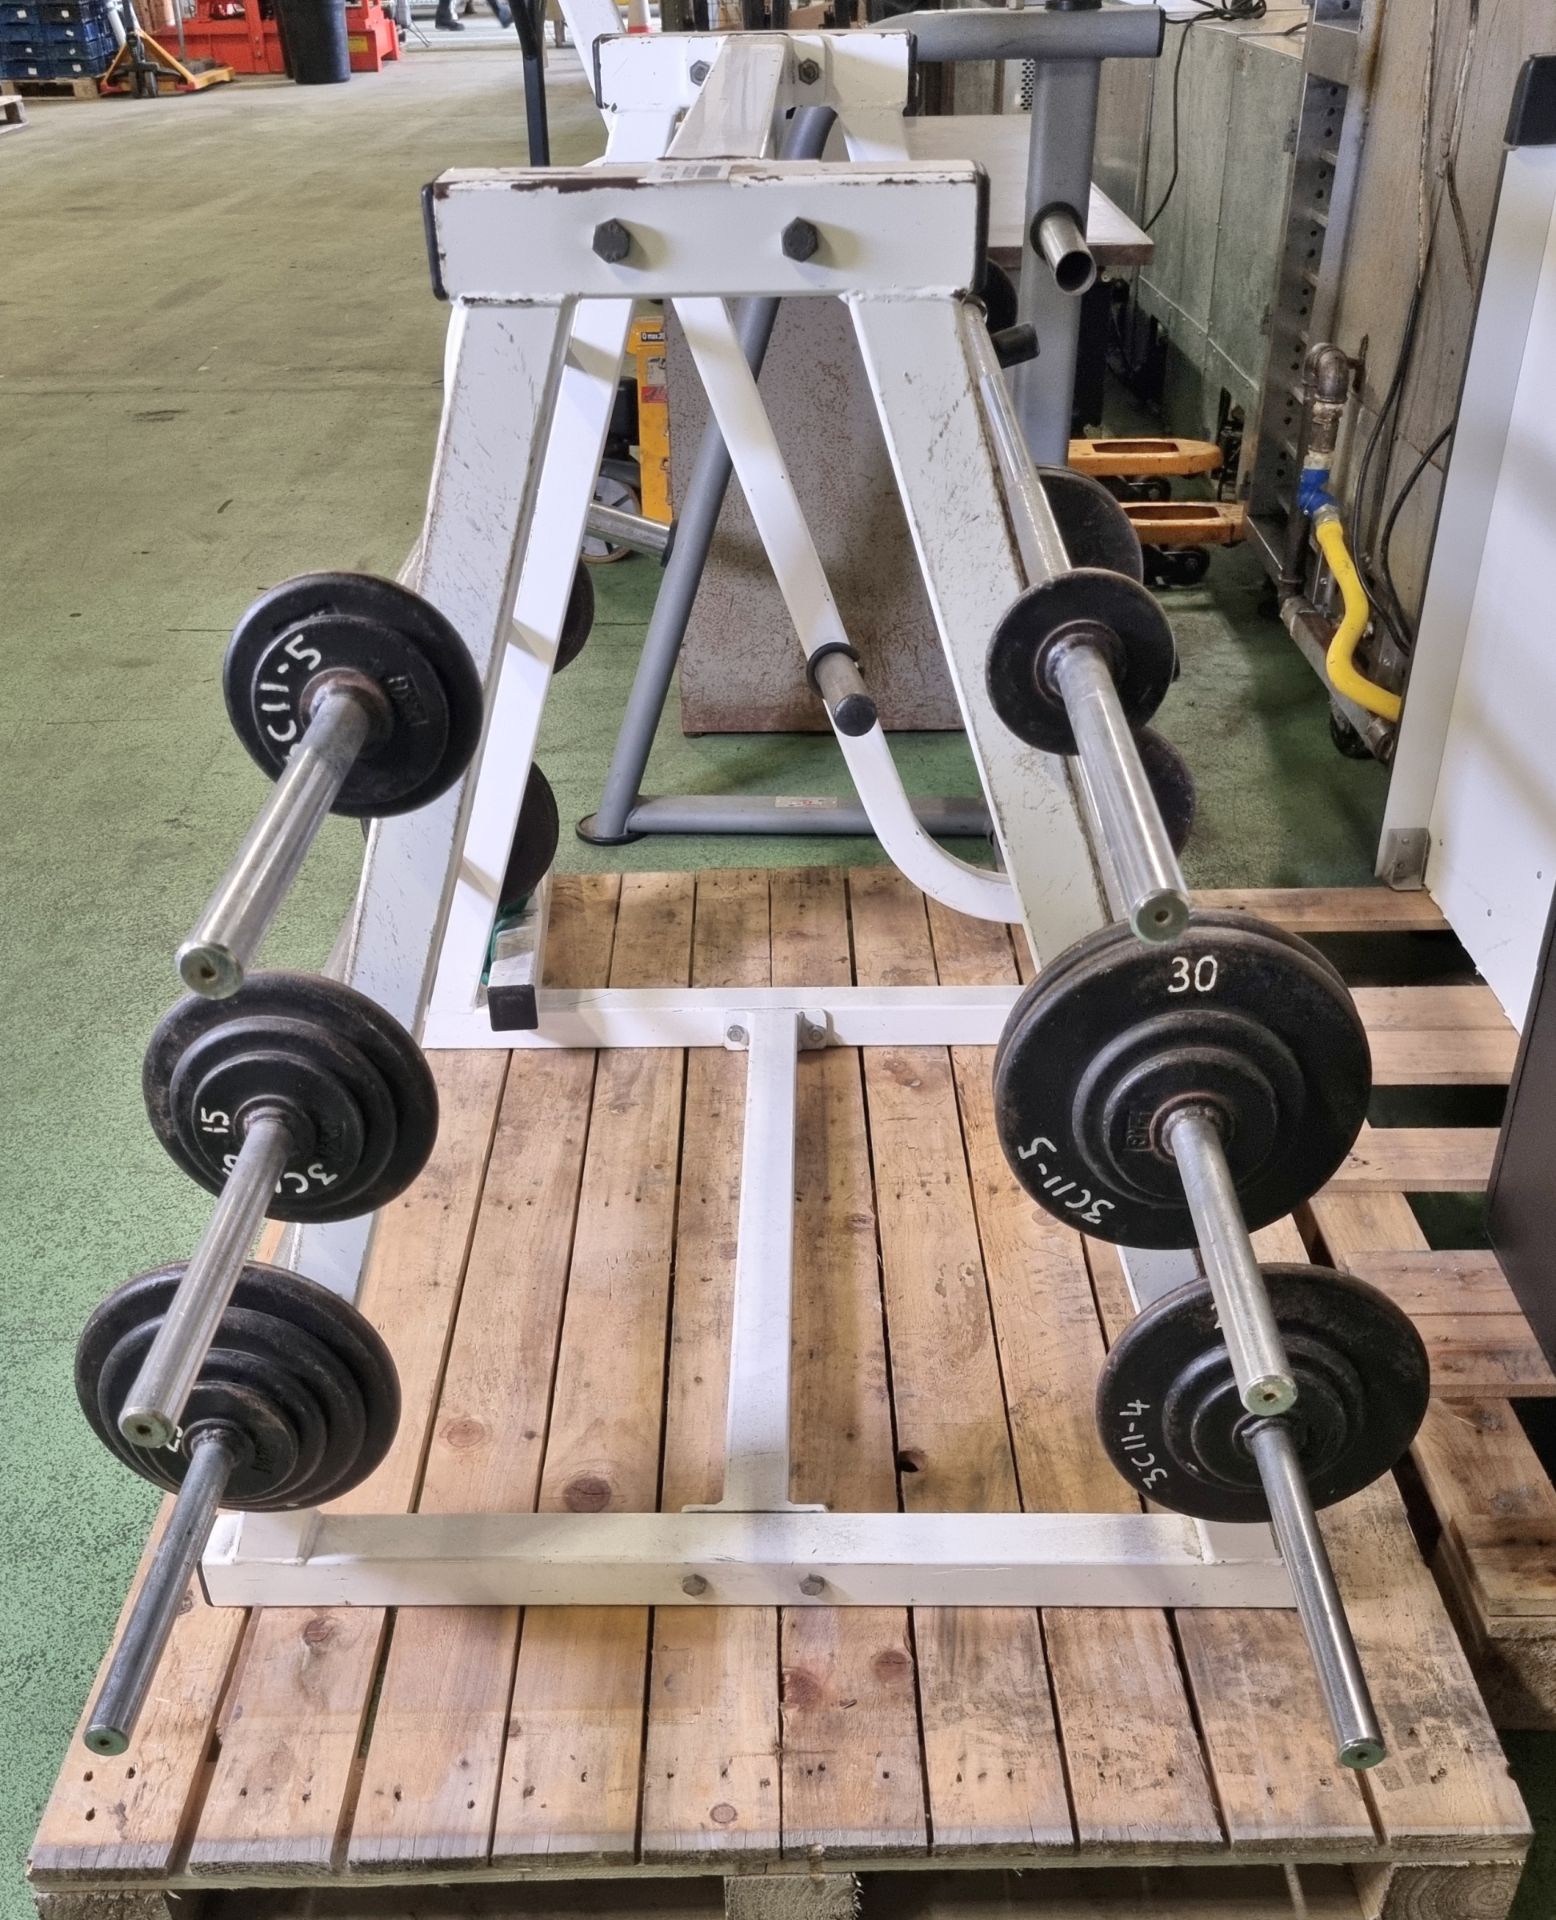 Metal weight rack - L50 x W79 x H126cm, Barbell rack with assortment of barbells in various weights - Image 4 of 4